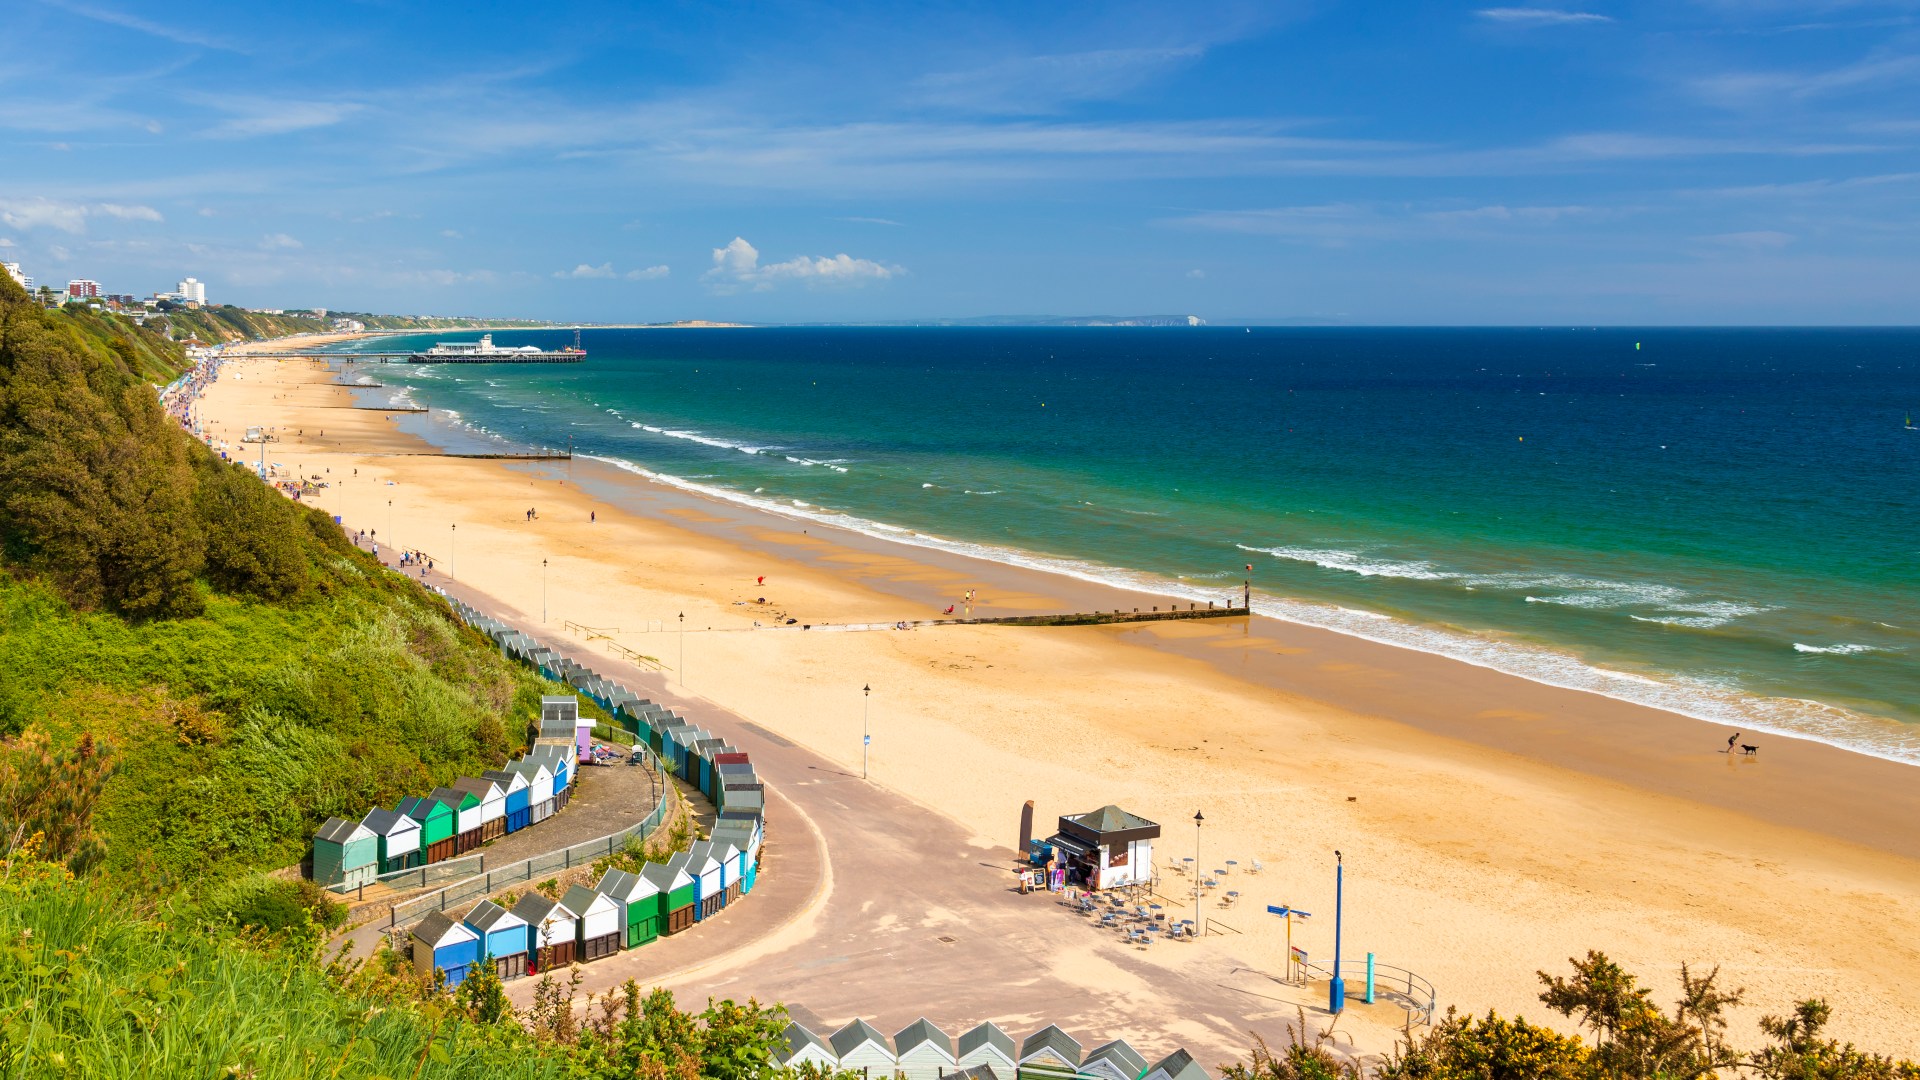 Cops probe sex assaults after girls ‘touched inappropriately in the water’ on Bournemouth Beach as man, 26, arrested